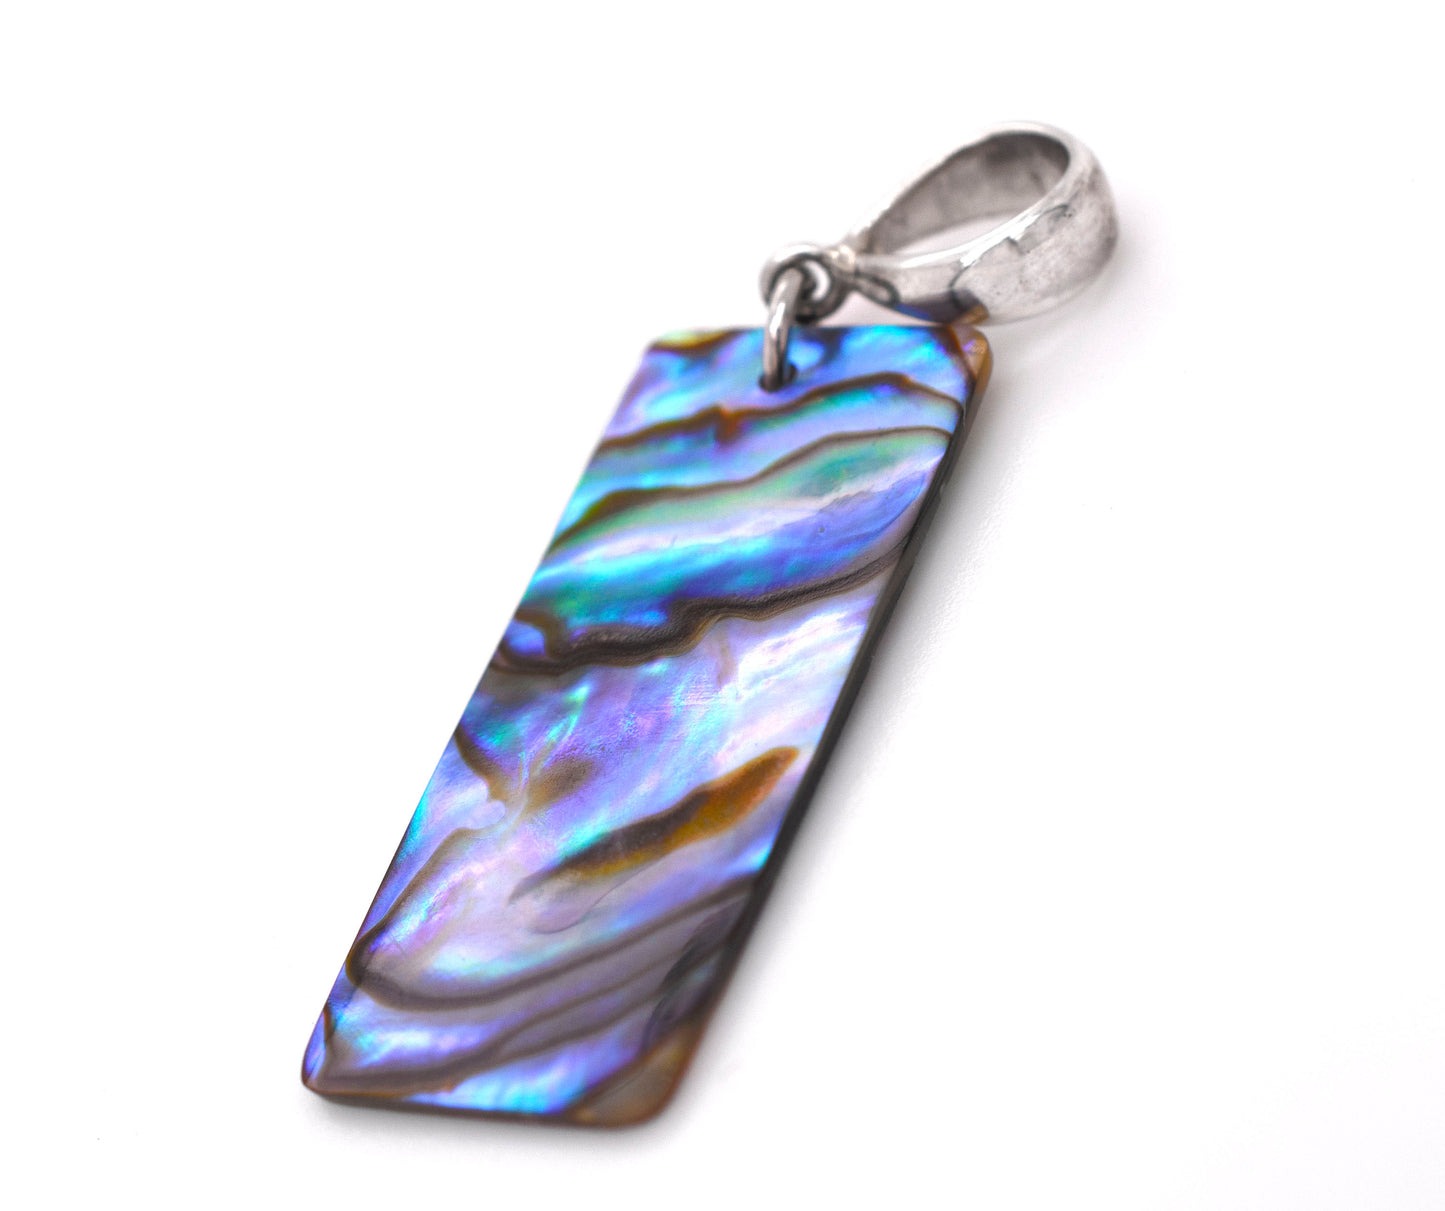 A Rectangular Abalone Slab Pendant by Super Silver on a white background.